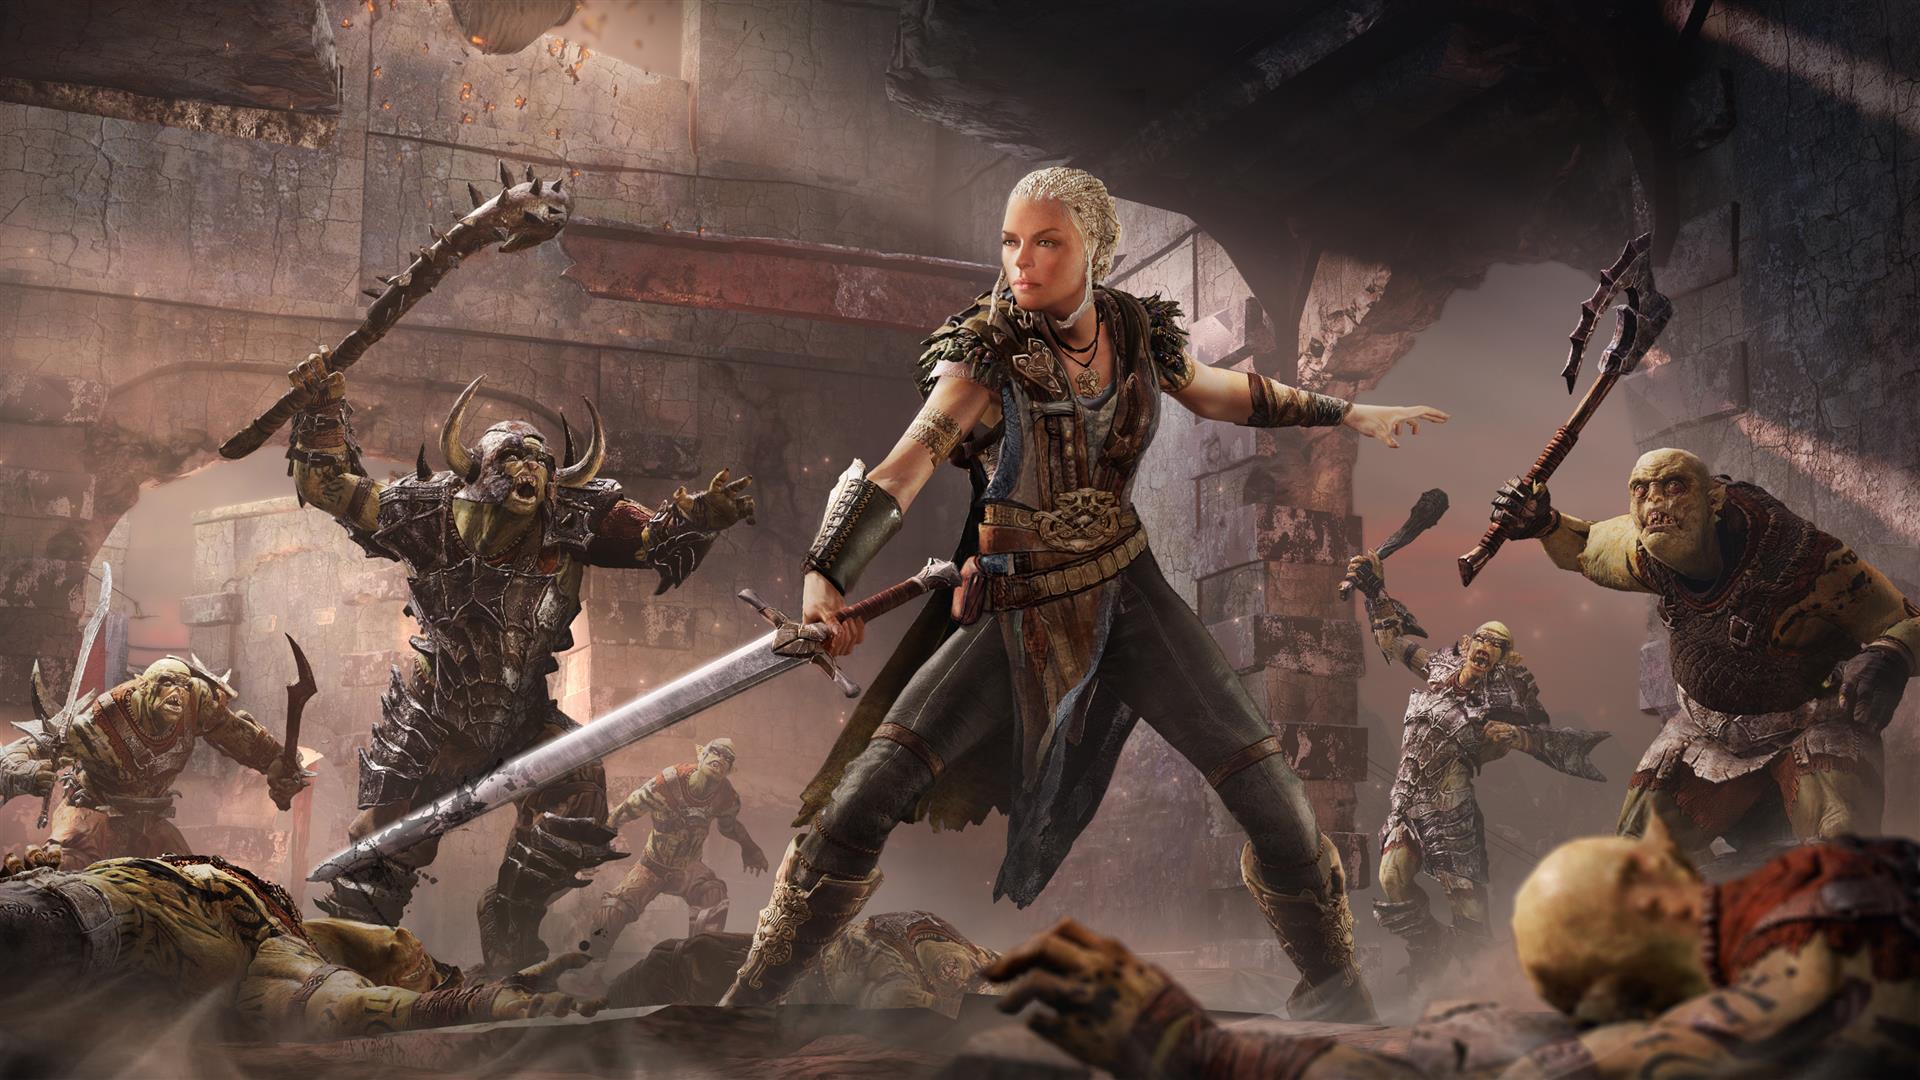 Shadow Of Mordor Free DLC For PC, PS4 And Xbox One